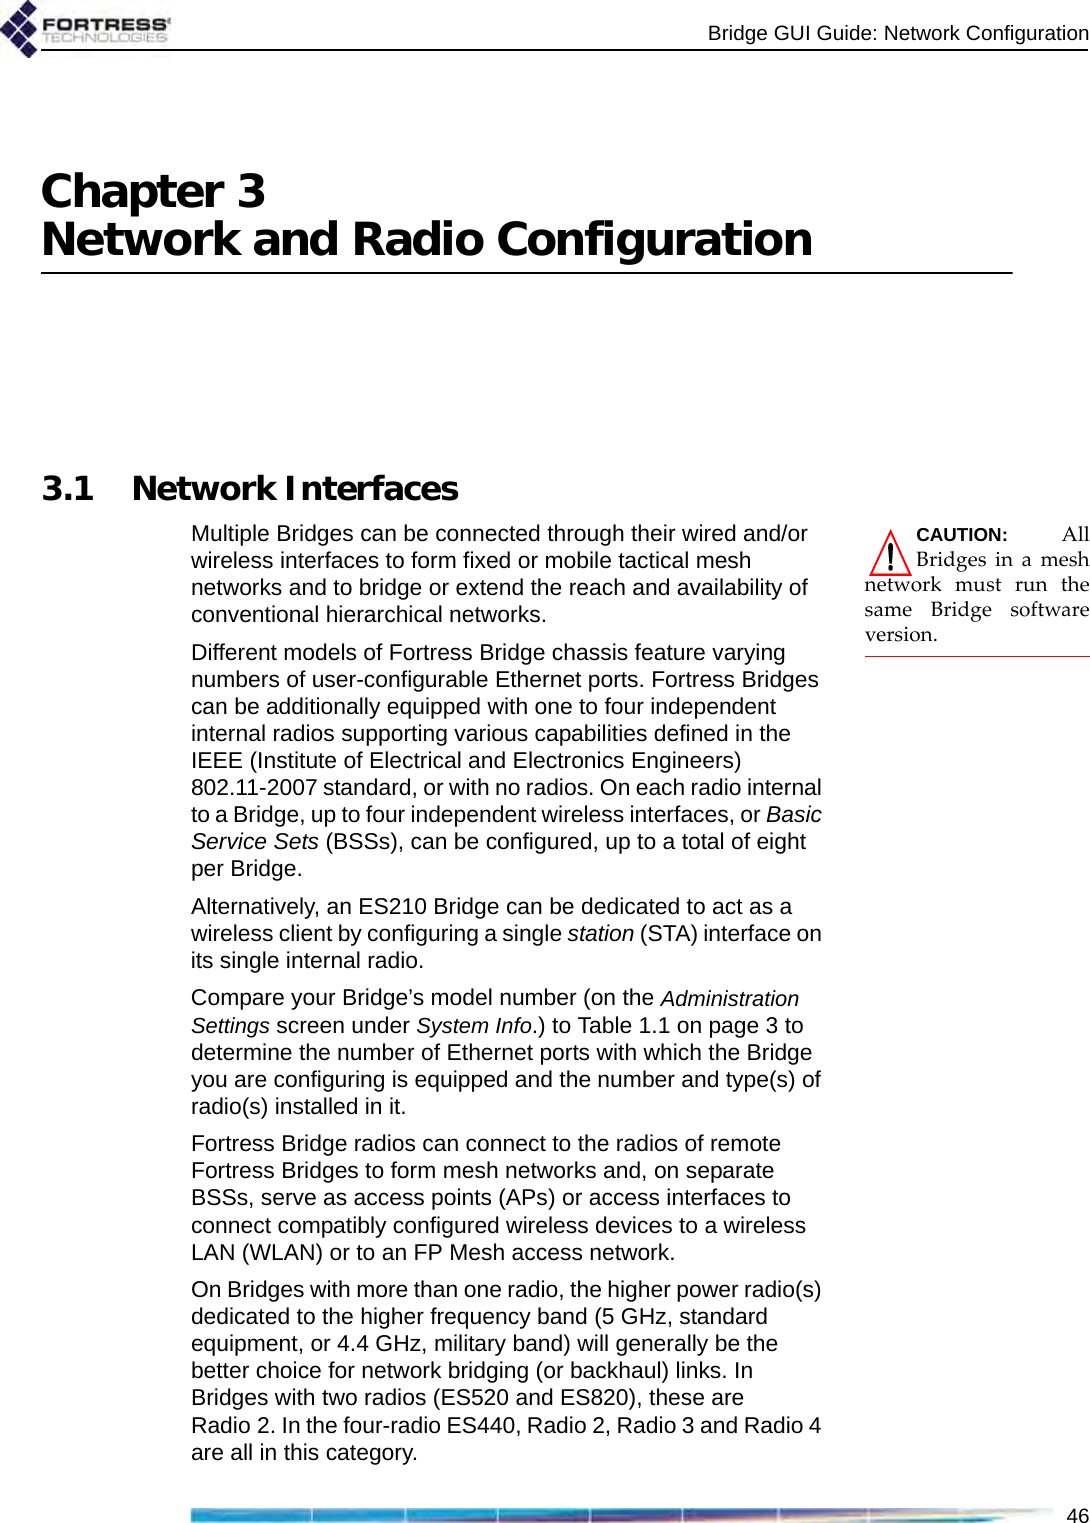 Bridge GUI Guide: Network Configuration46Chapter 3Network and Radio Configuration3.1 Network InterfacesCAUTION: AllBridges in a meshnetwork must run thesame Bridge softwareversion.Multiple Bridges can be connected through their wired and/or wireless interfaces to form fixed or mobile tactical mesh networks and to bridge or extend the reach and availability of conventional hierarchical networks.Different models of Fortress Bridge chassis feature varying numbers of user-configurable Ethernet ports. Fortress Bridges can be additionally equipped with one to four independent internal radios supporting various capabilities defined in the IEEE (Institute of Electrical and Electronics Engineers) 802.11-2007 standard, or with no radios. On each radio internal to a Bridge, up to four independent wireless interfaces, or Basic Service Sets (BSSs), can be configured, up to a total of eight per Bridge. Alternatively, an ES210 Bridge can be dedicated to act as a wireless client by configuring a single station (STA) interface on its single internal radio.Compare your Bridge’s model number (on the Administration Settings screen under System Info.) to Table 1.1 on page 3 to determine the number of Ethernet ports with which the Bridge you are configuring is equipped and the number and type(s) of radio(s) installed in it.Fortress Bridge radios can connect to the radios of remote Fortress Bridges to form mesh networks and, on separate BSSs, serve as access points (APs) or access interfaces to connect compatibly configured wireless devices to a wireless LAN (WLAN) or to an FP Mesh access network. On Bridges with more than one radio, the higher power radio(s) dedicated to the higher frequency band (5 GHz, standard equipment, or 4.4 GHz, military band) will generally be the better choice for network bridging (or backhaul) links. In Bridges with two radios (ES520 and ES820), these are Radio 2. In the four-radio ES440, Radio 2, Radio 3 and Radio 4 are all in this category. 